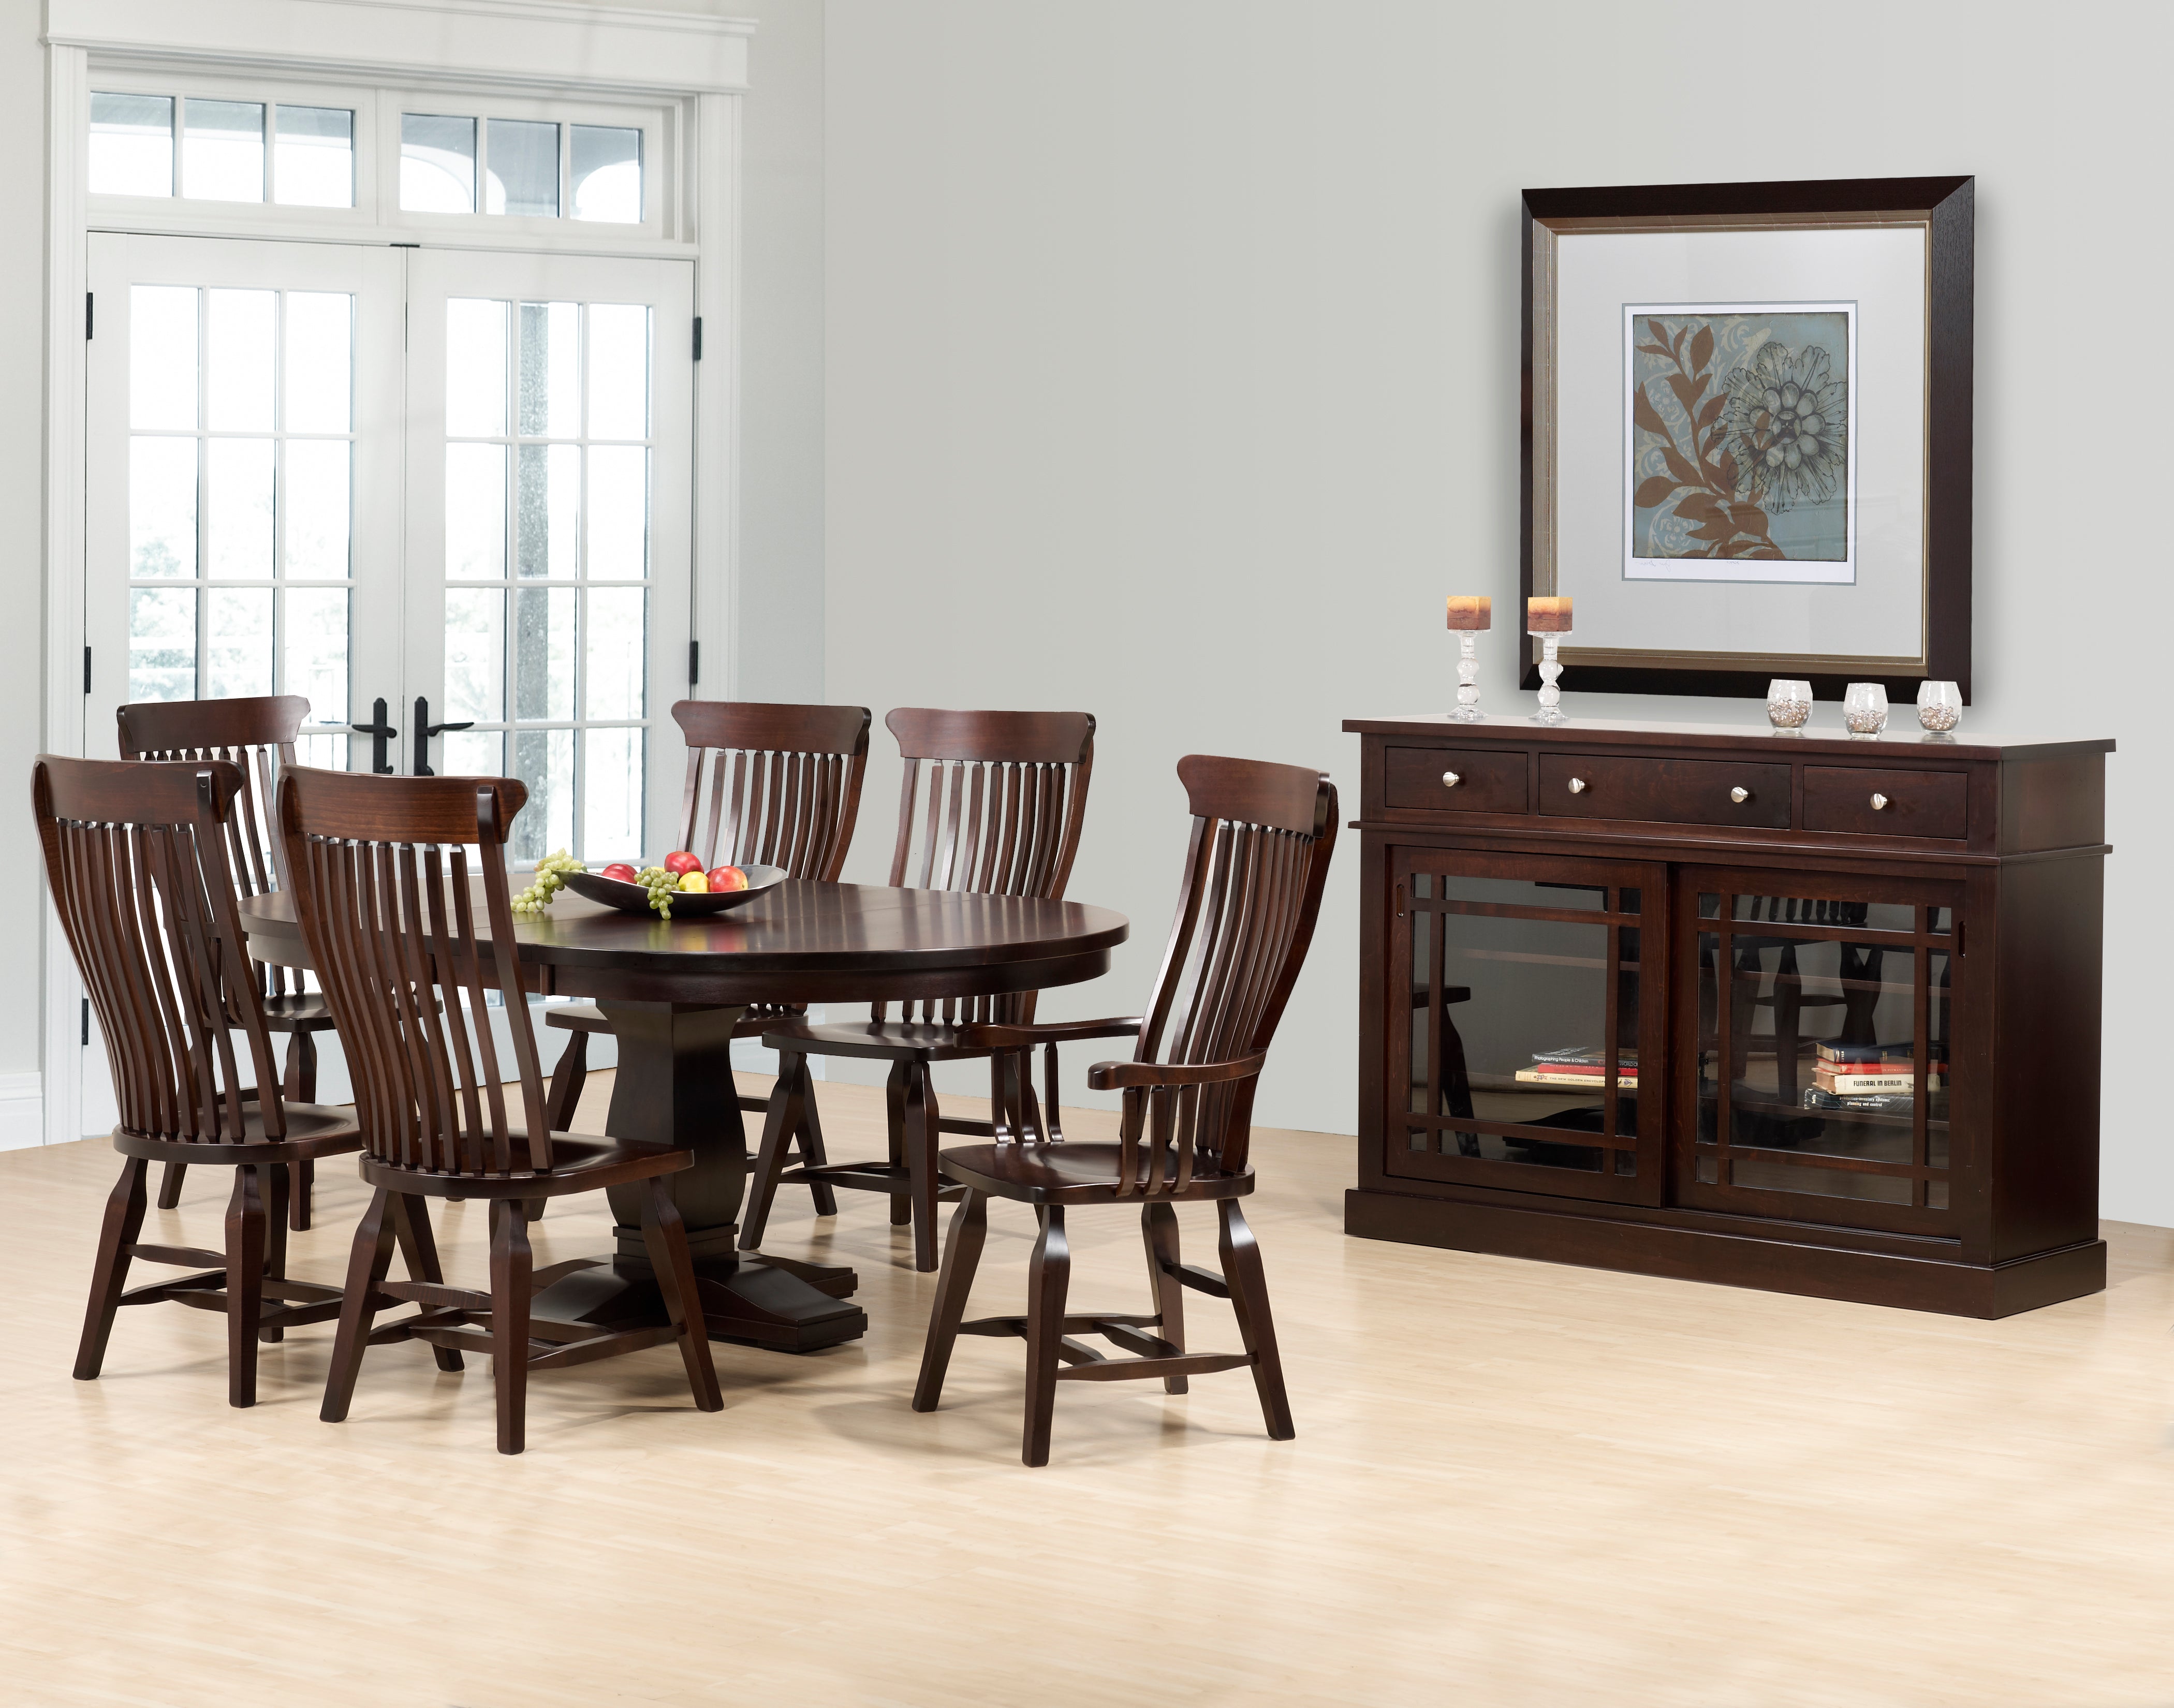 Chair as Shown | Cardinal Woodcraft Old South Dining Chair | Valley Ridge Furniture